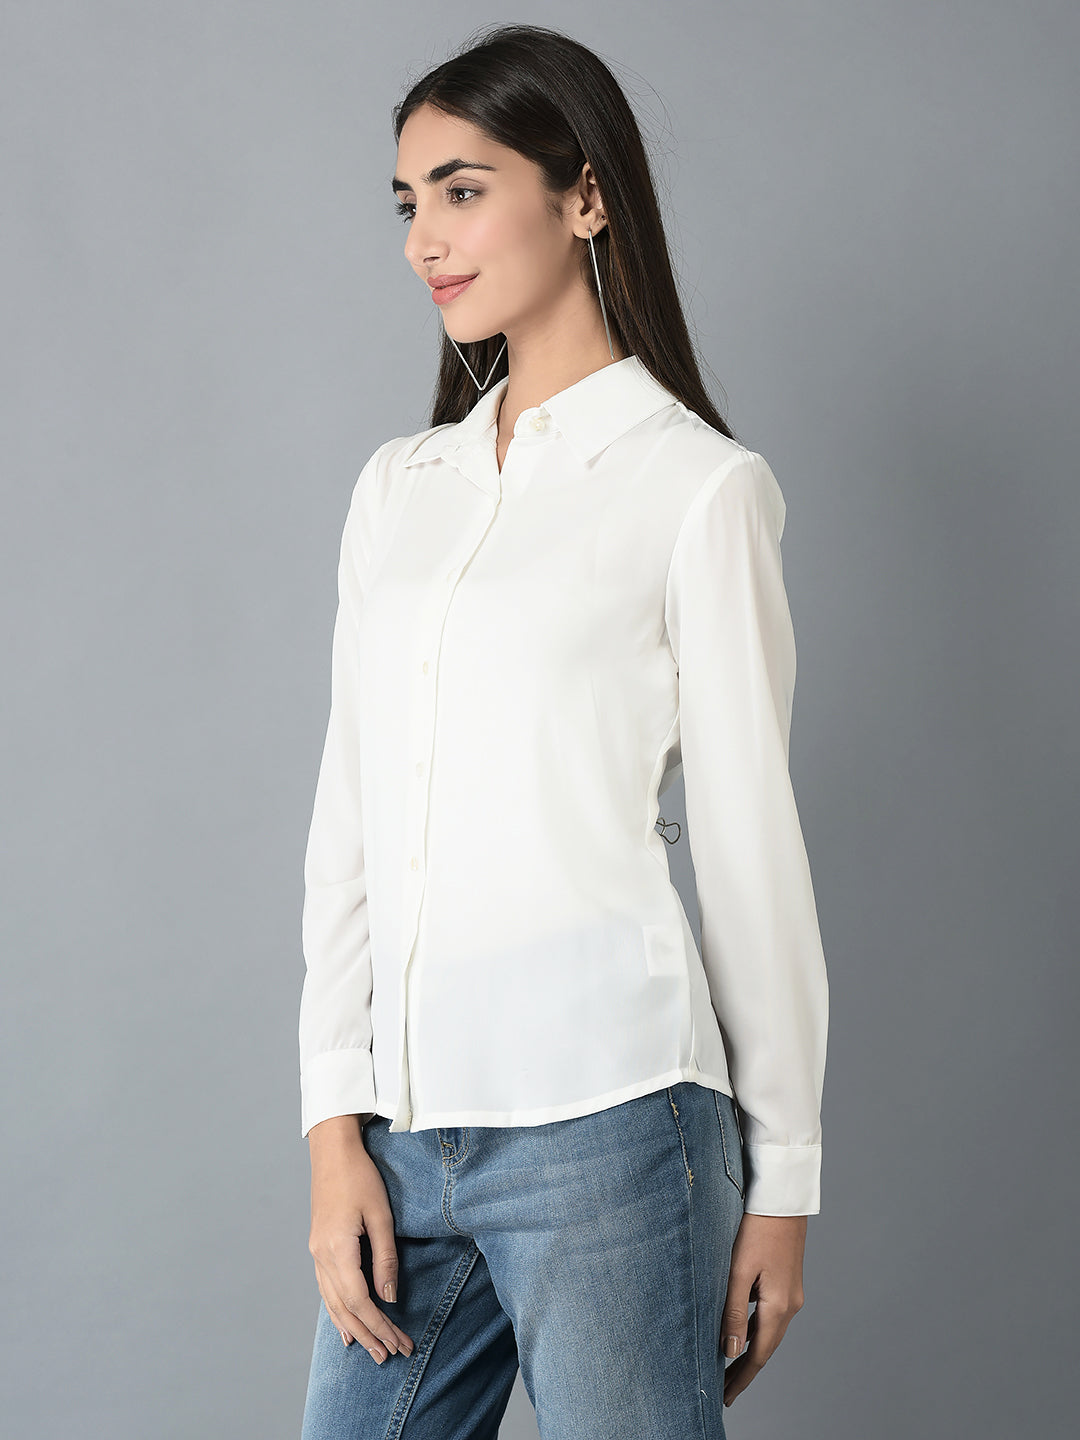 Copy of Copy of Canoe Women Drop Shoulder Sustainable Casual Shirt